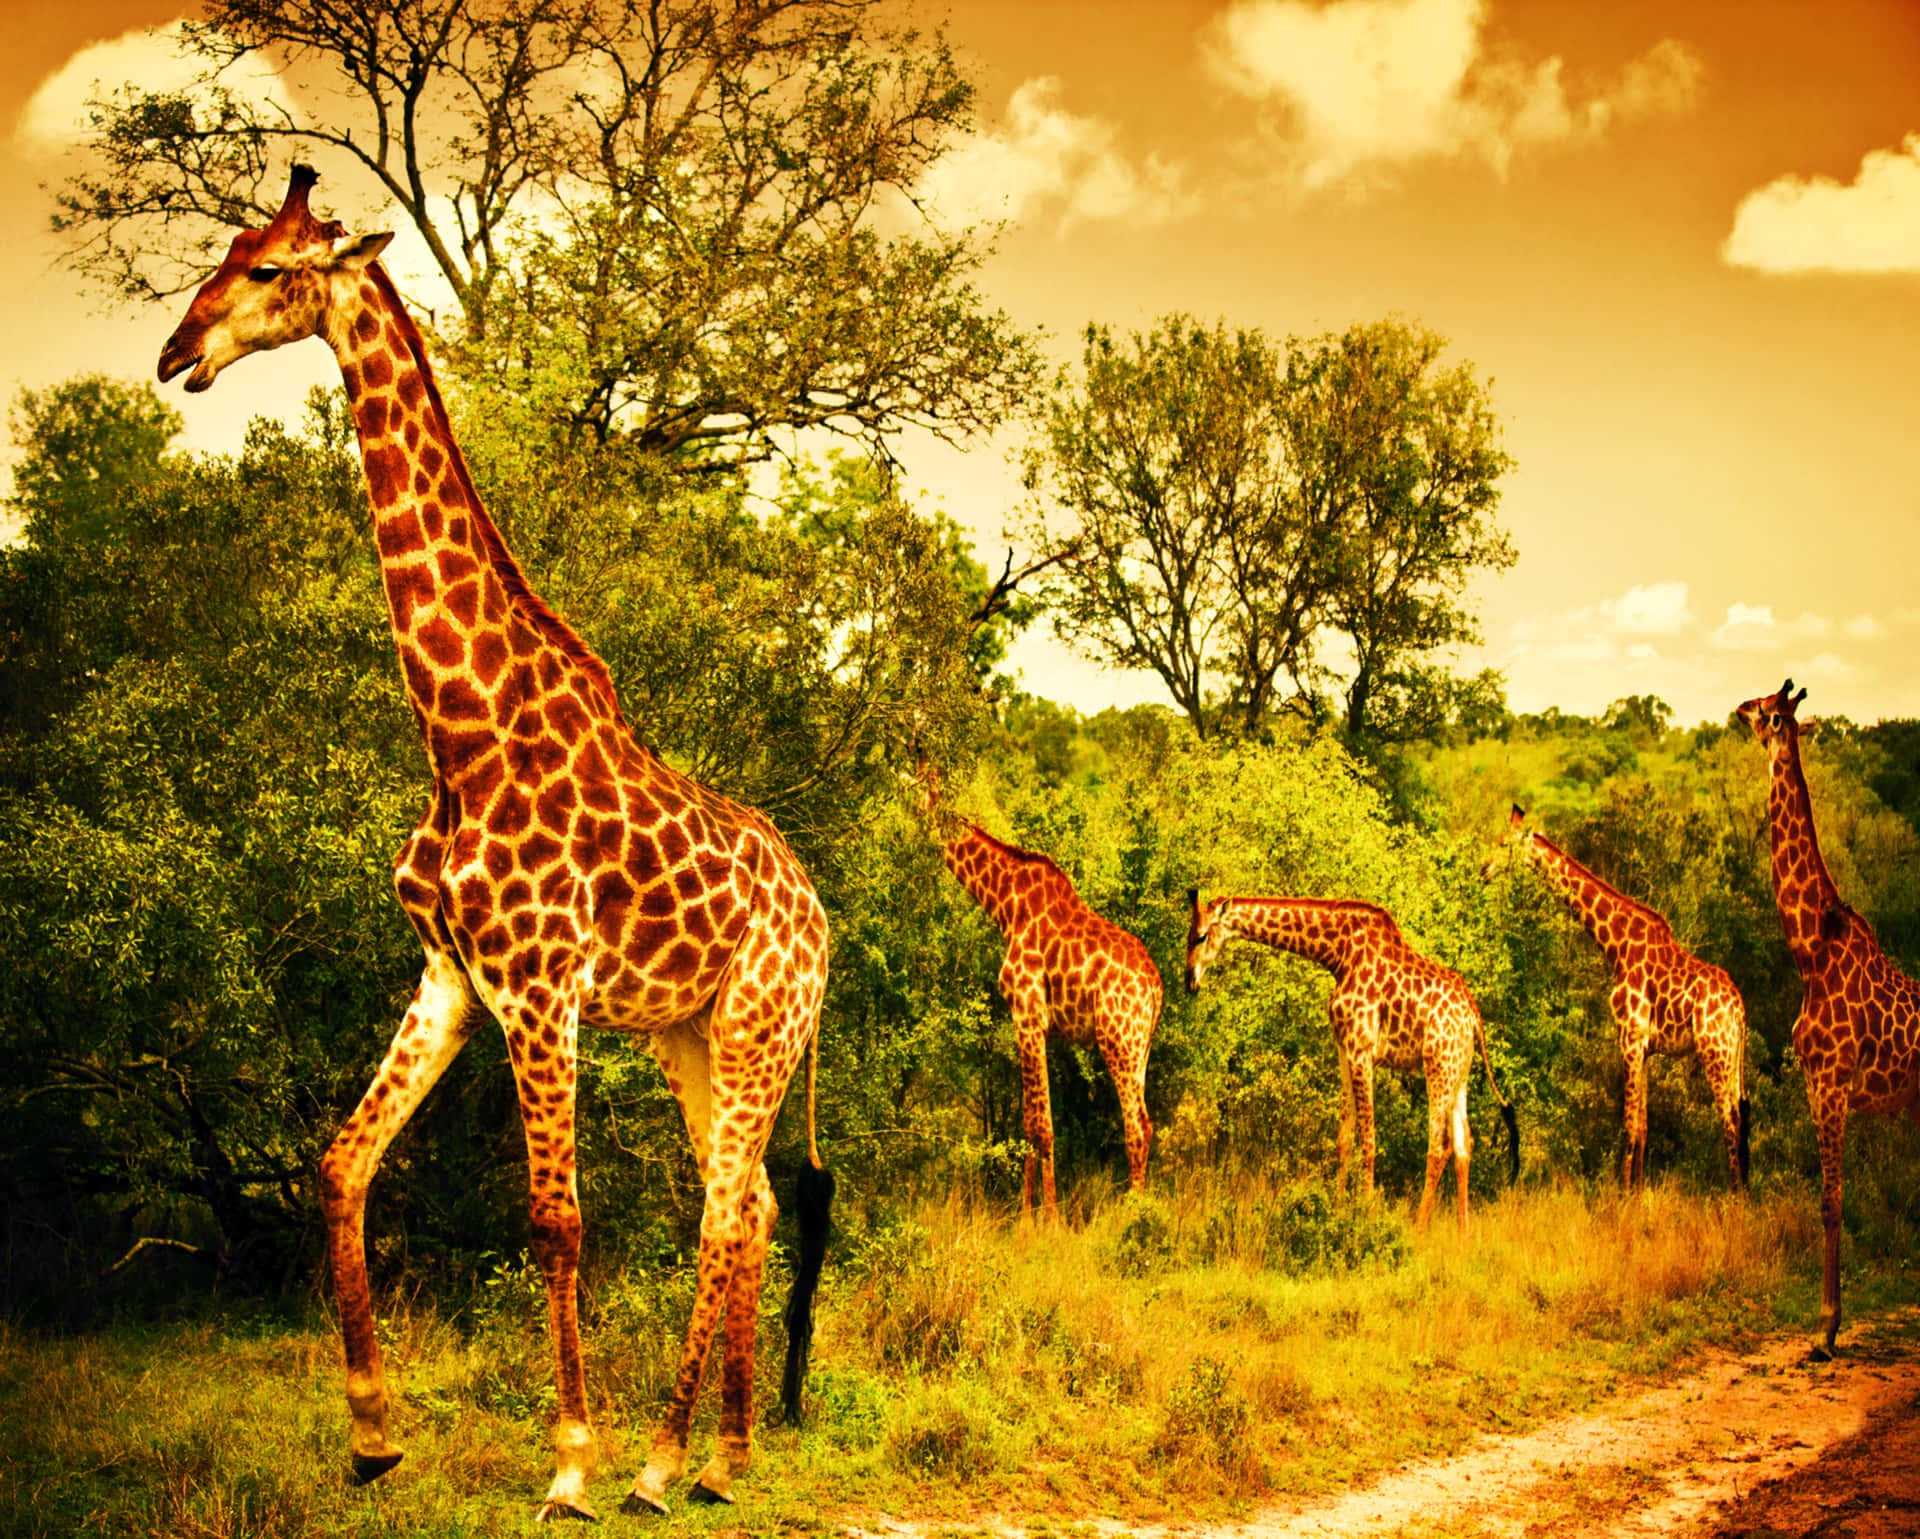 Witness the magnificence of African wildlife in the savanna. Wallpaper